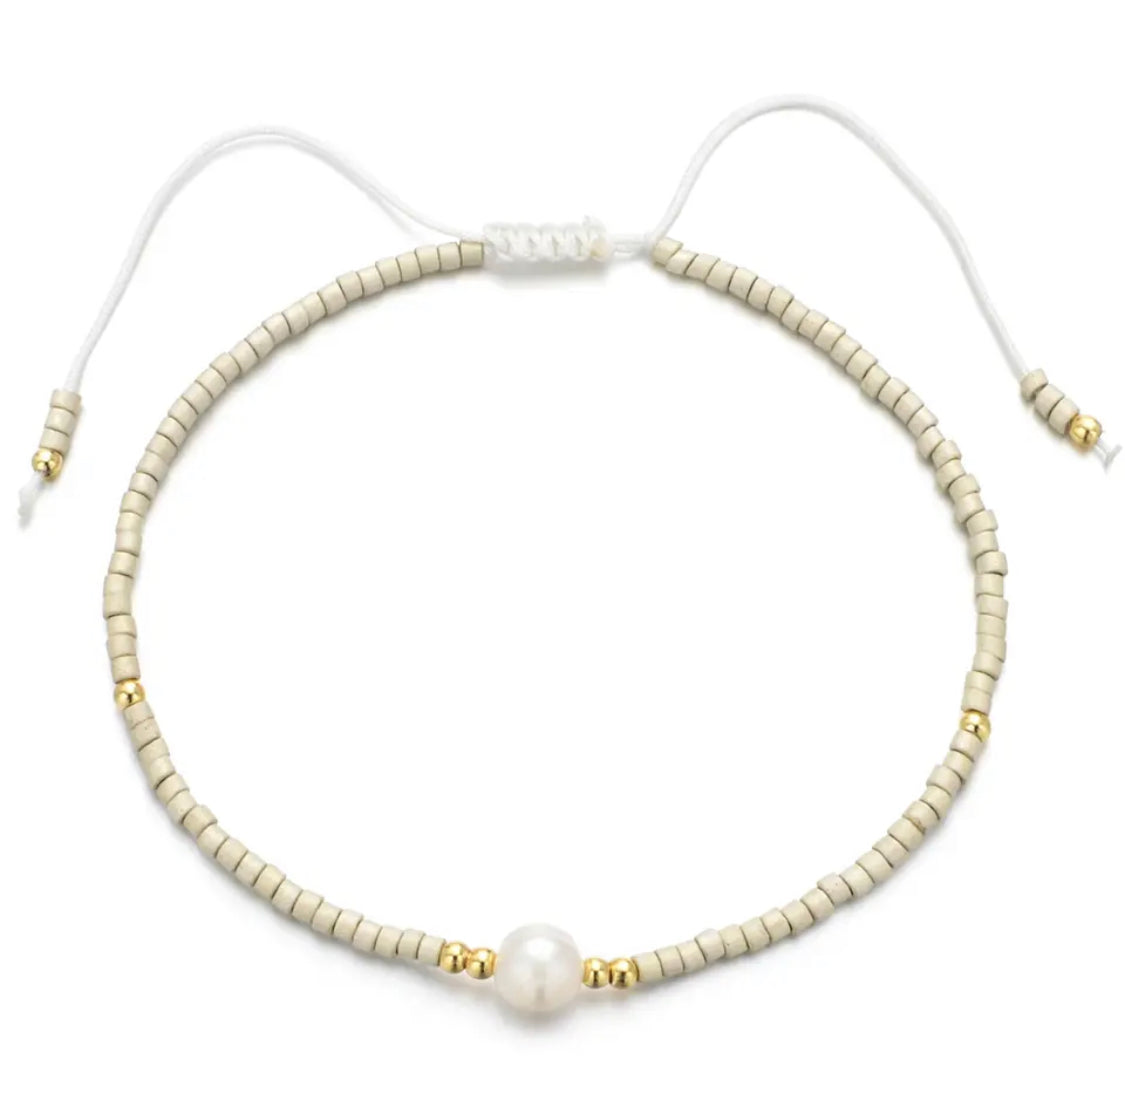 Armband white Pearl von selected by edel weiss edel weiss